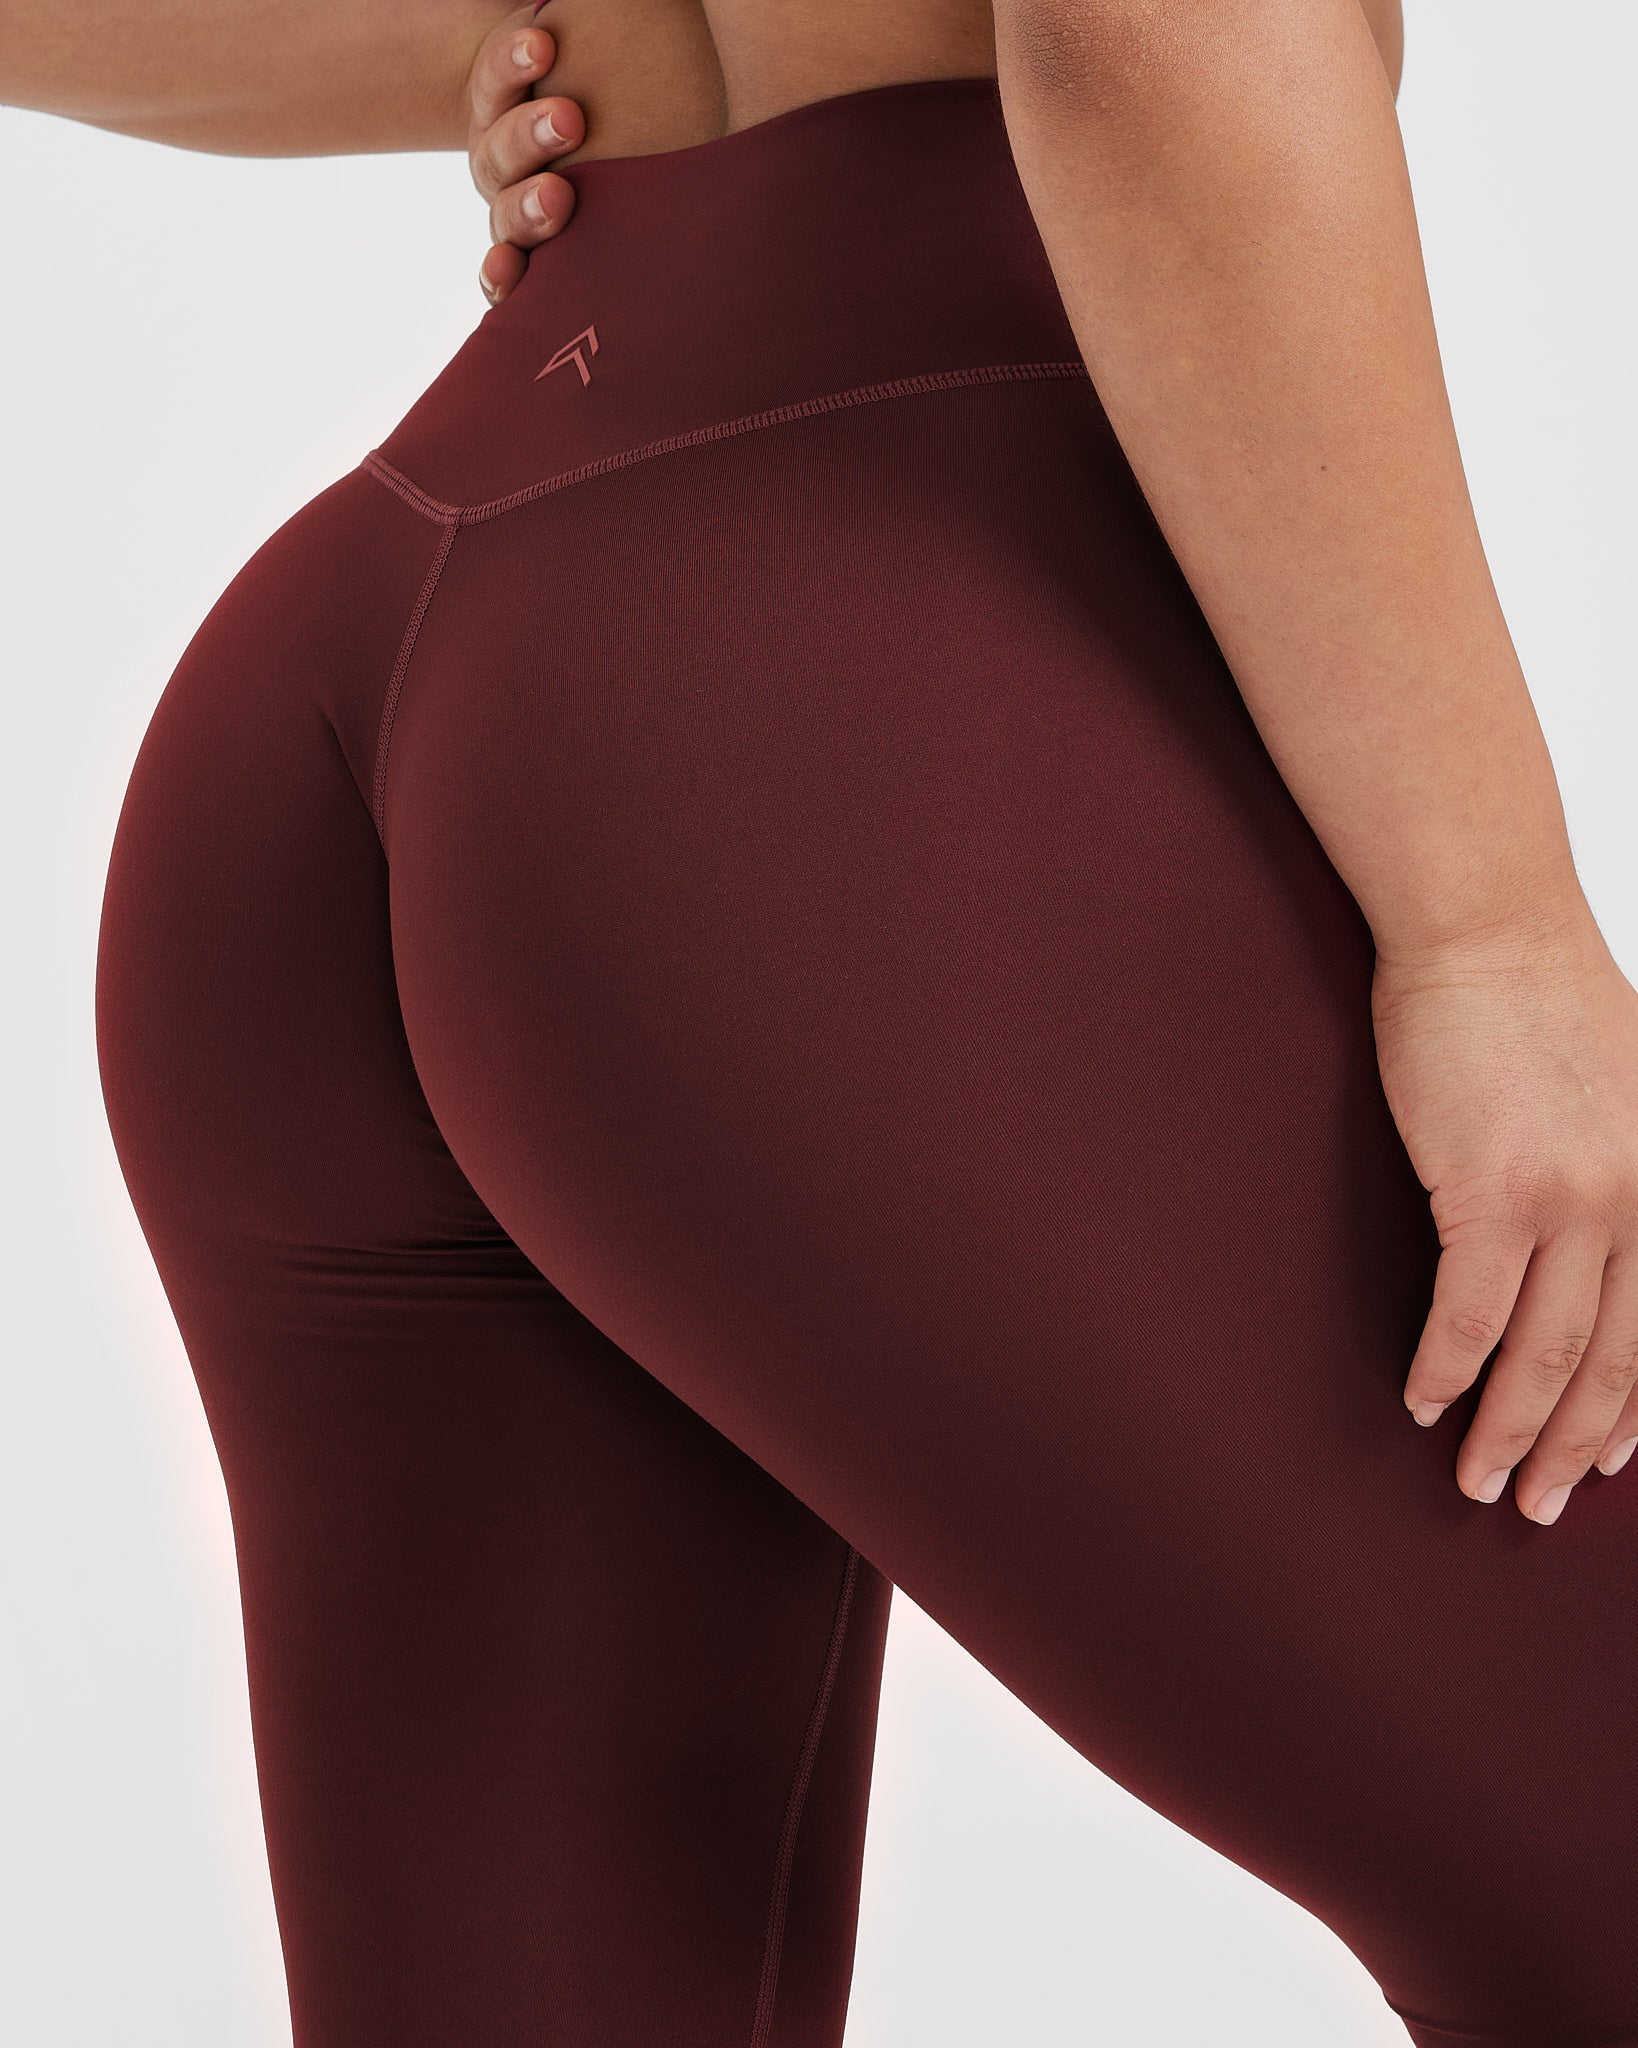 Fabletics High Waisted Mesh Powerhold 7/8 Berry Maroon Workout